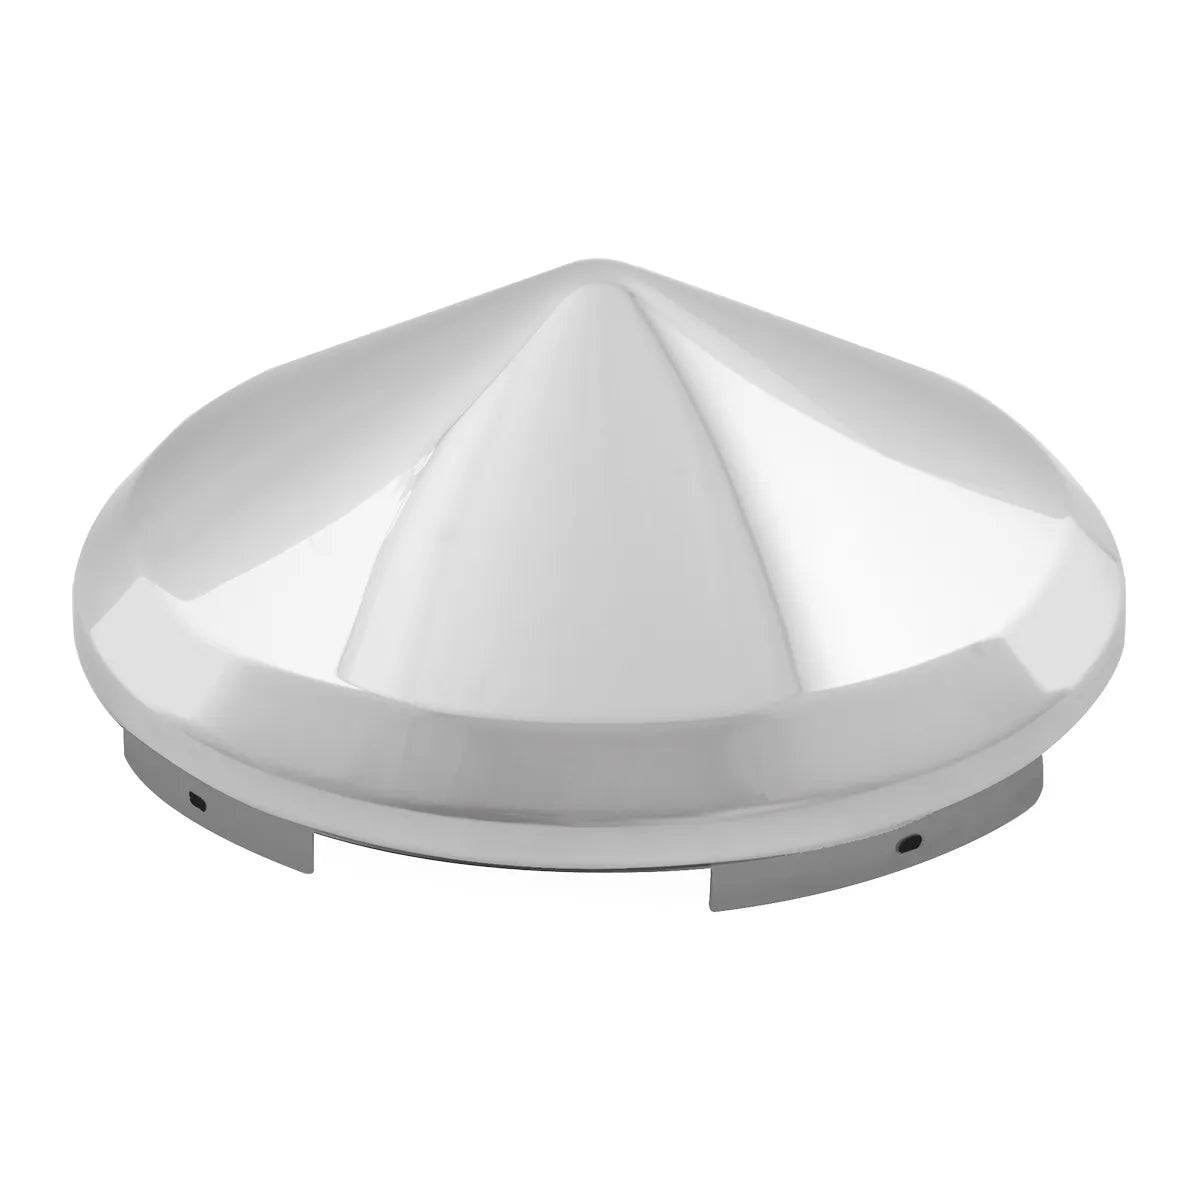 UNIVERSAL FRONT HUB CAP IN CONE SHAPE 10700